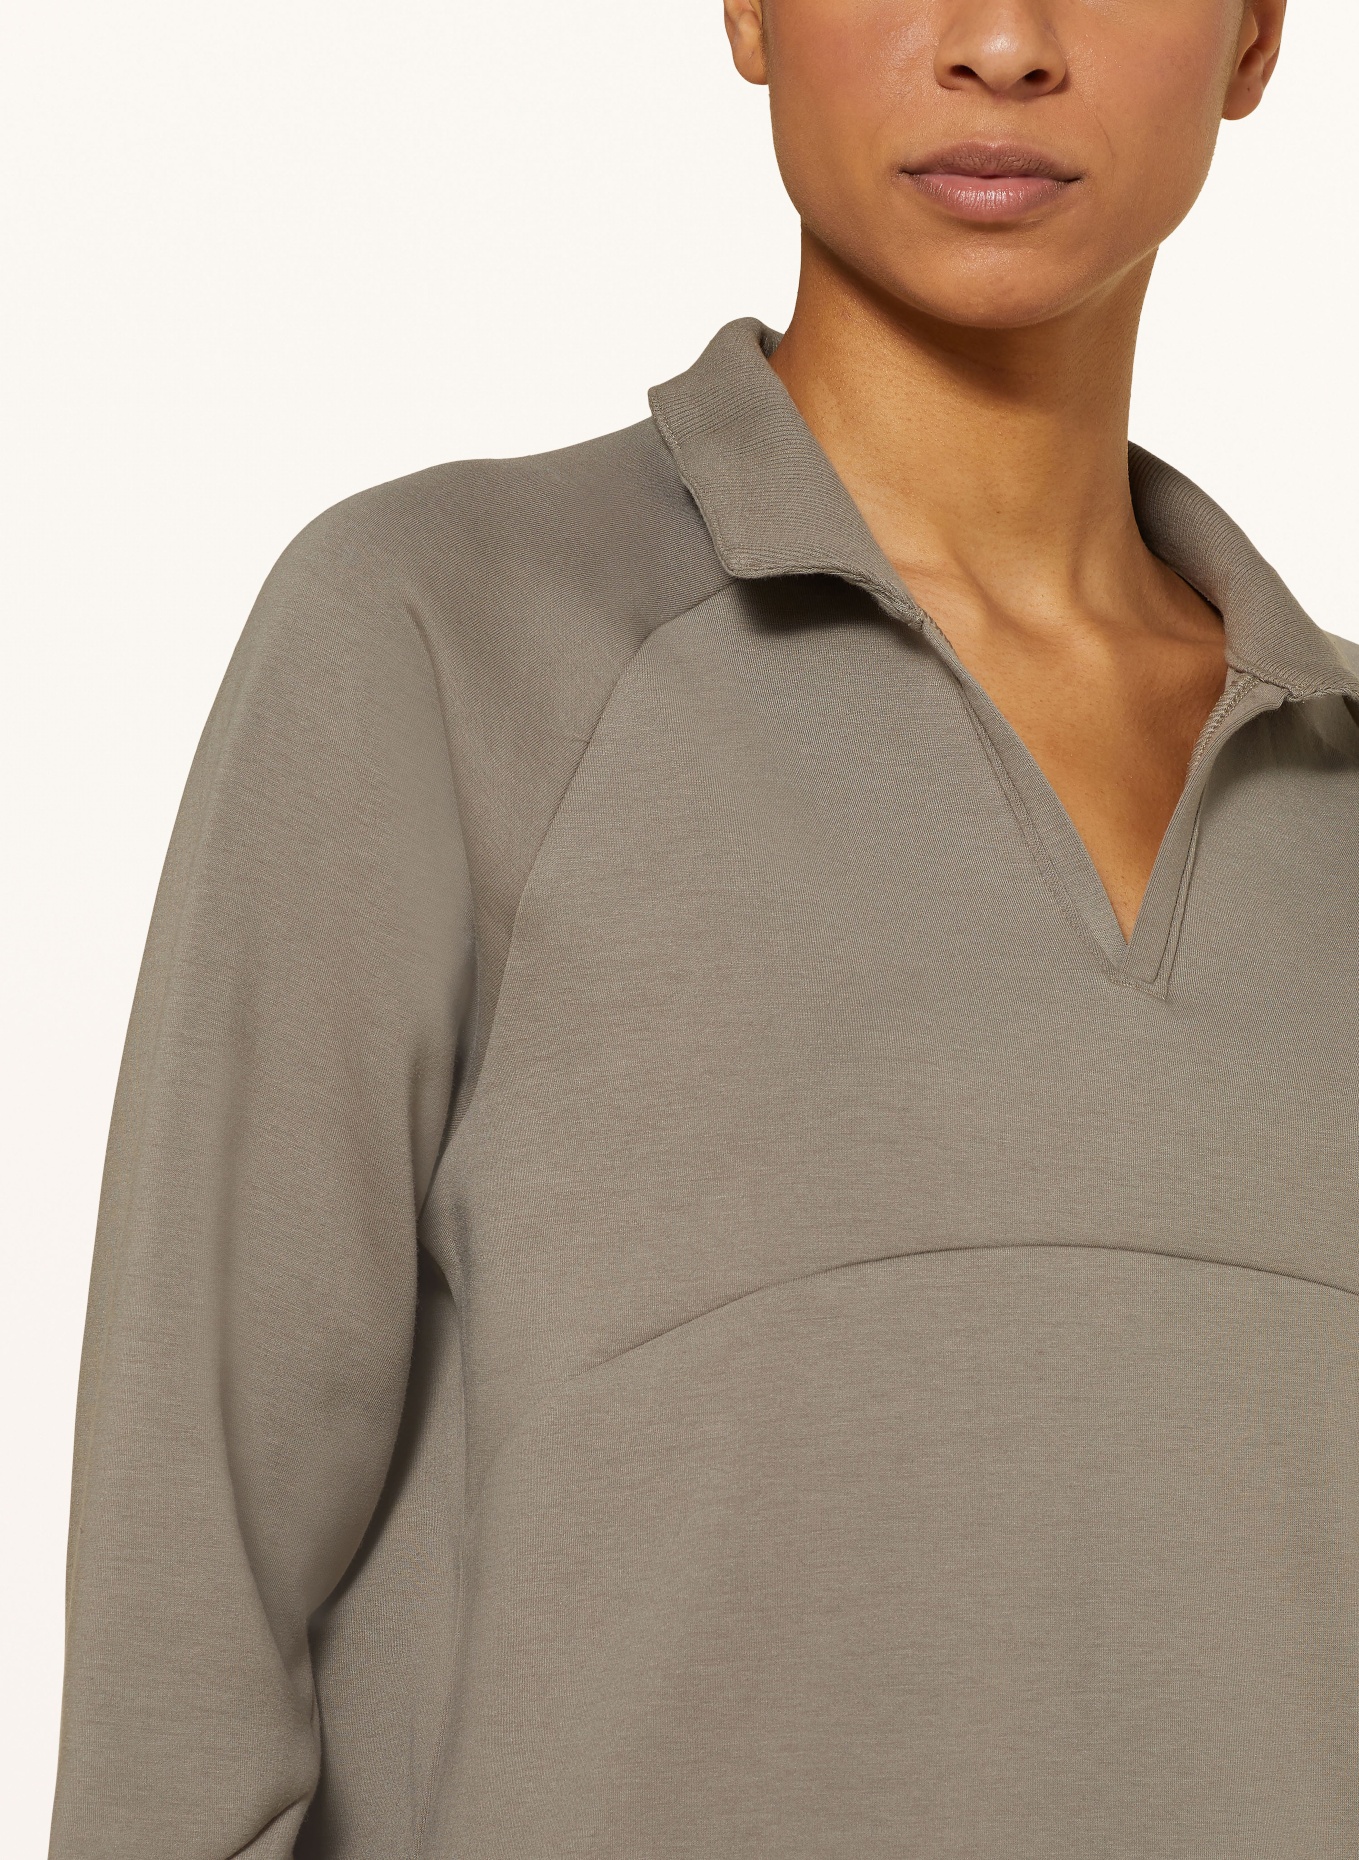 UNDER ARMOUR Sweatshirt UNSTOPPABLE, Farbe: TAUPE (Bild 4)